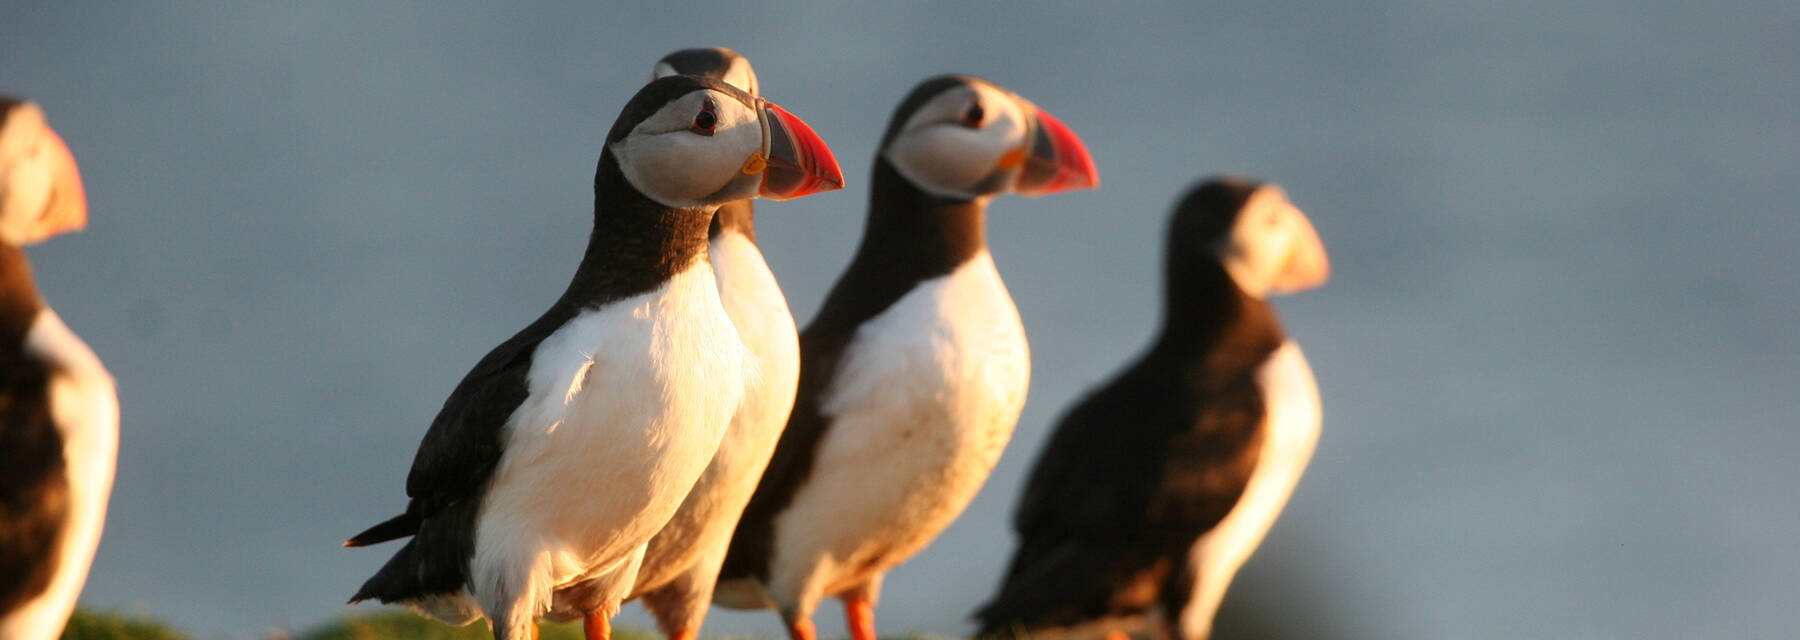 Four puffins stand in a row on top of a cliff.